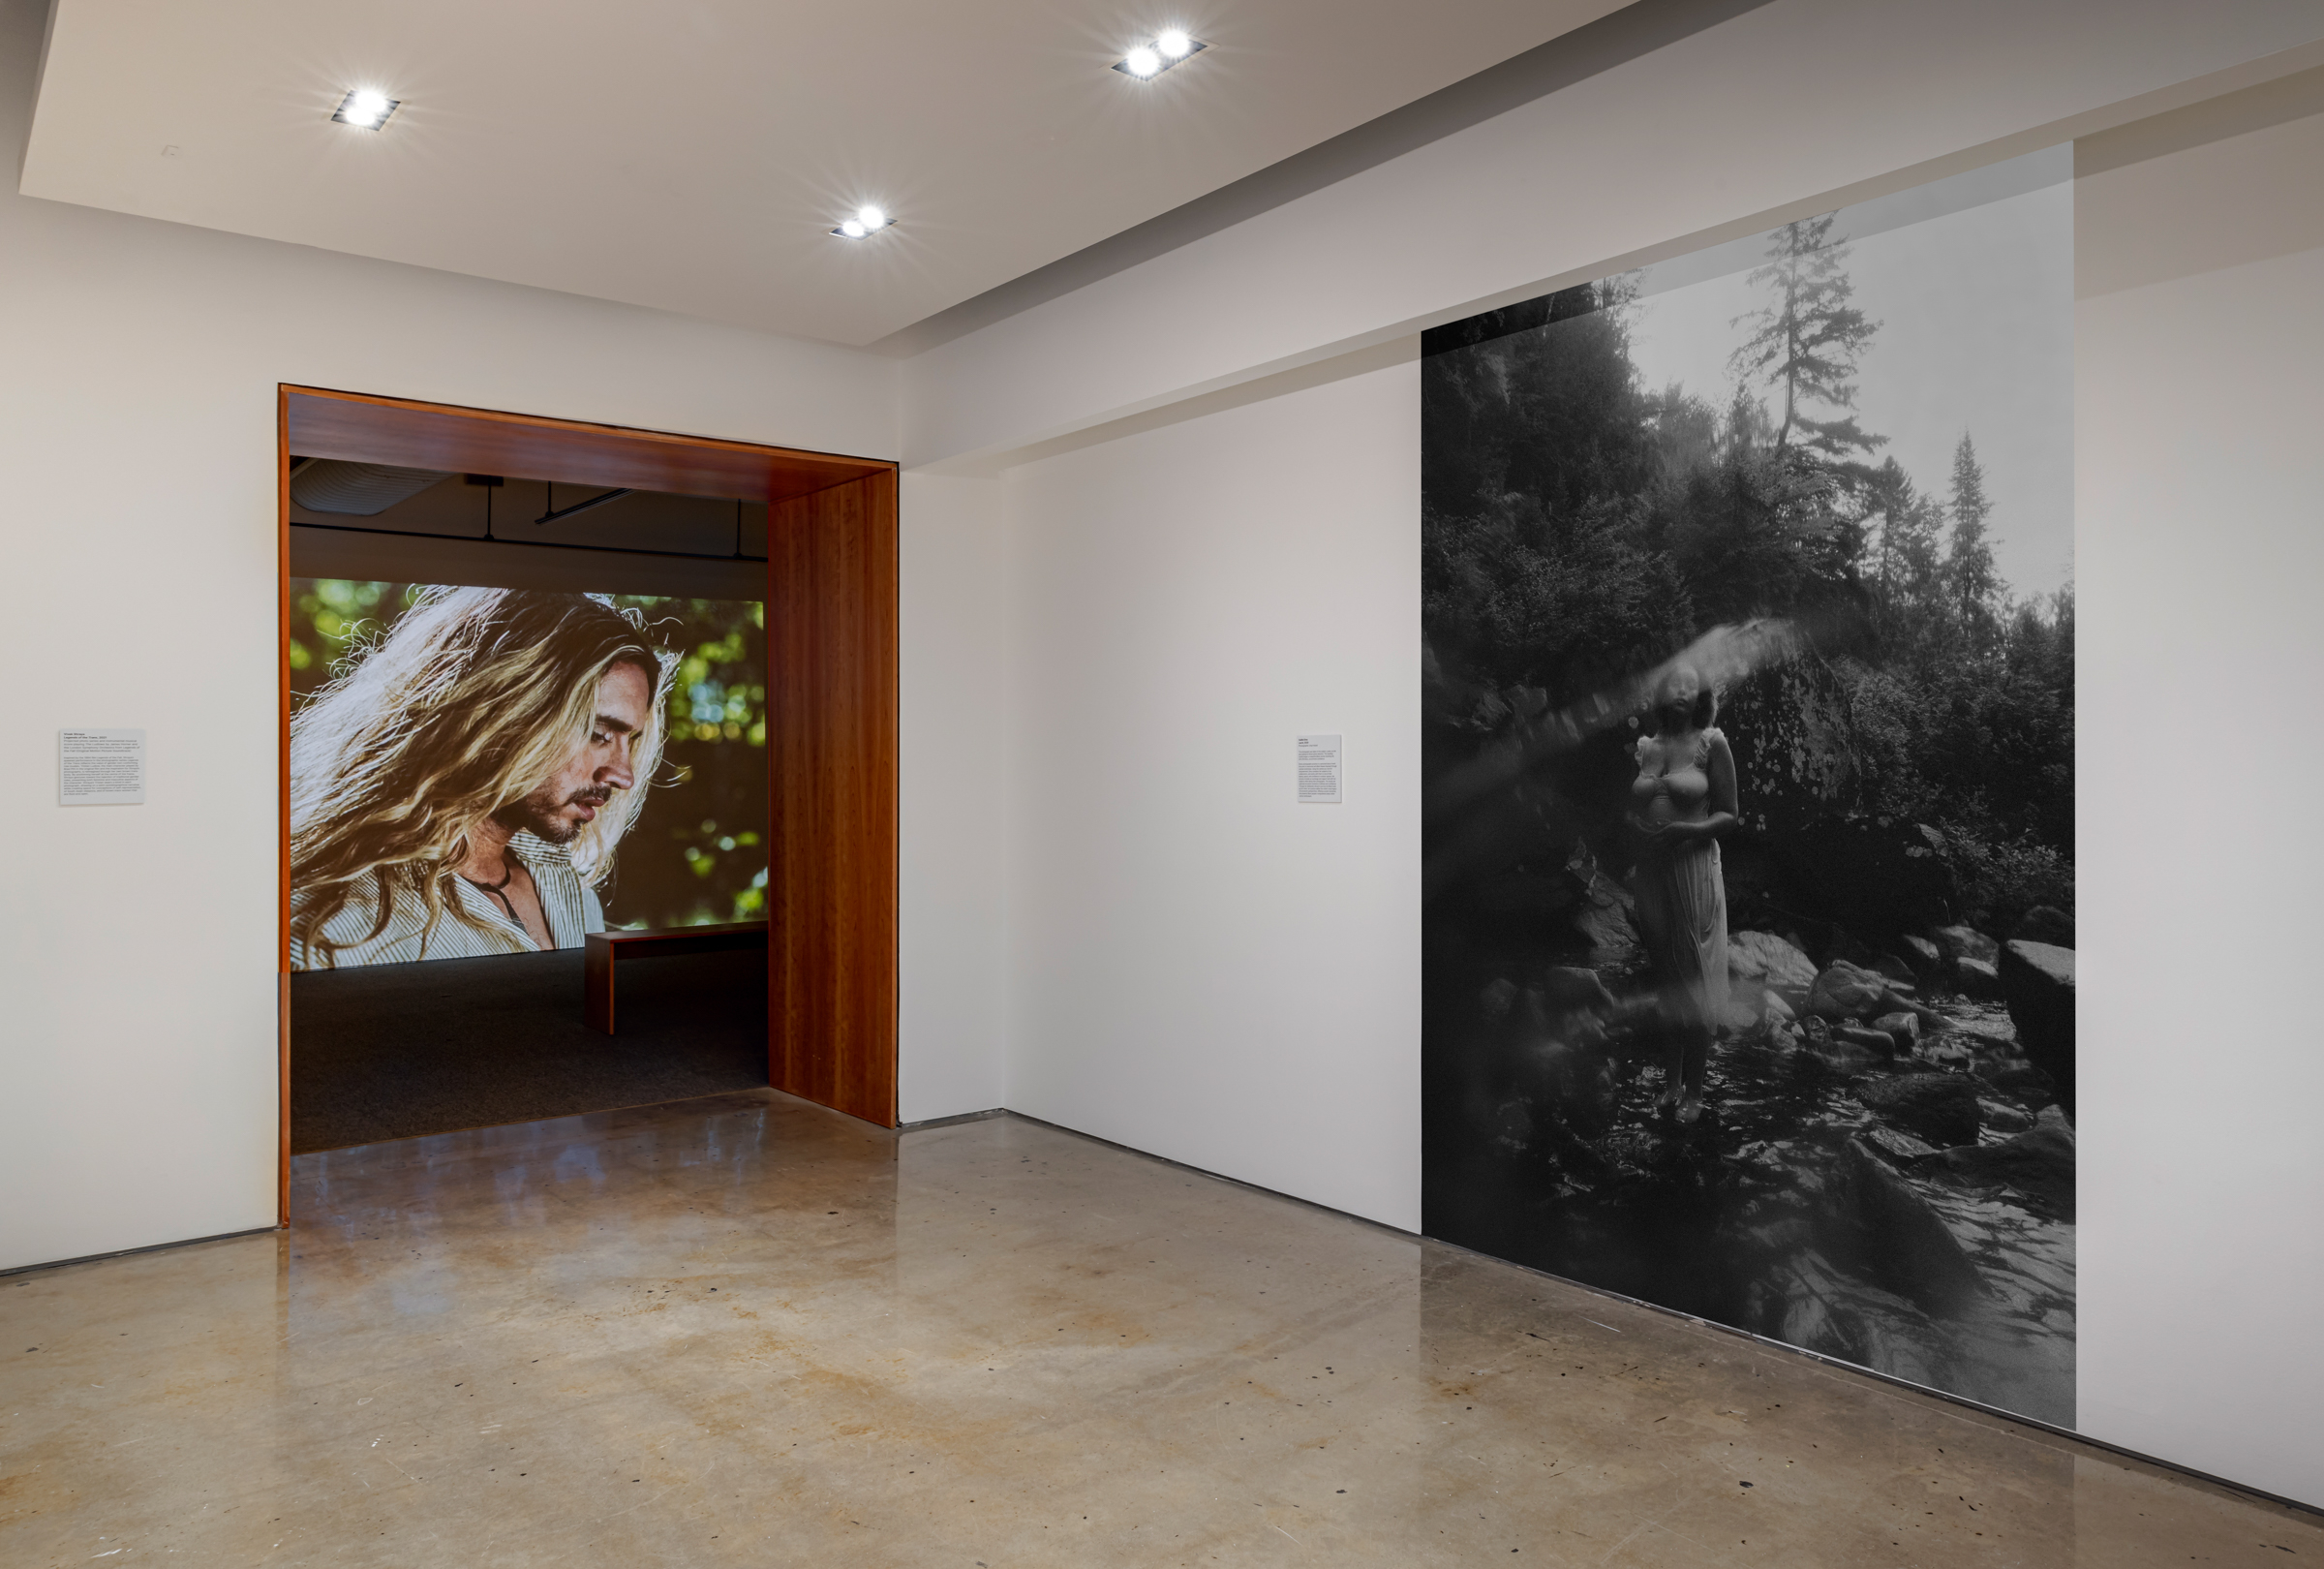     Group exhibition, Now You See Me, installation view, Doris McCarthy Gallery, 2022. Courtesy of the artists and Doris McCarthy Gallery. Photo by Toni Hafkenscheid

